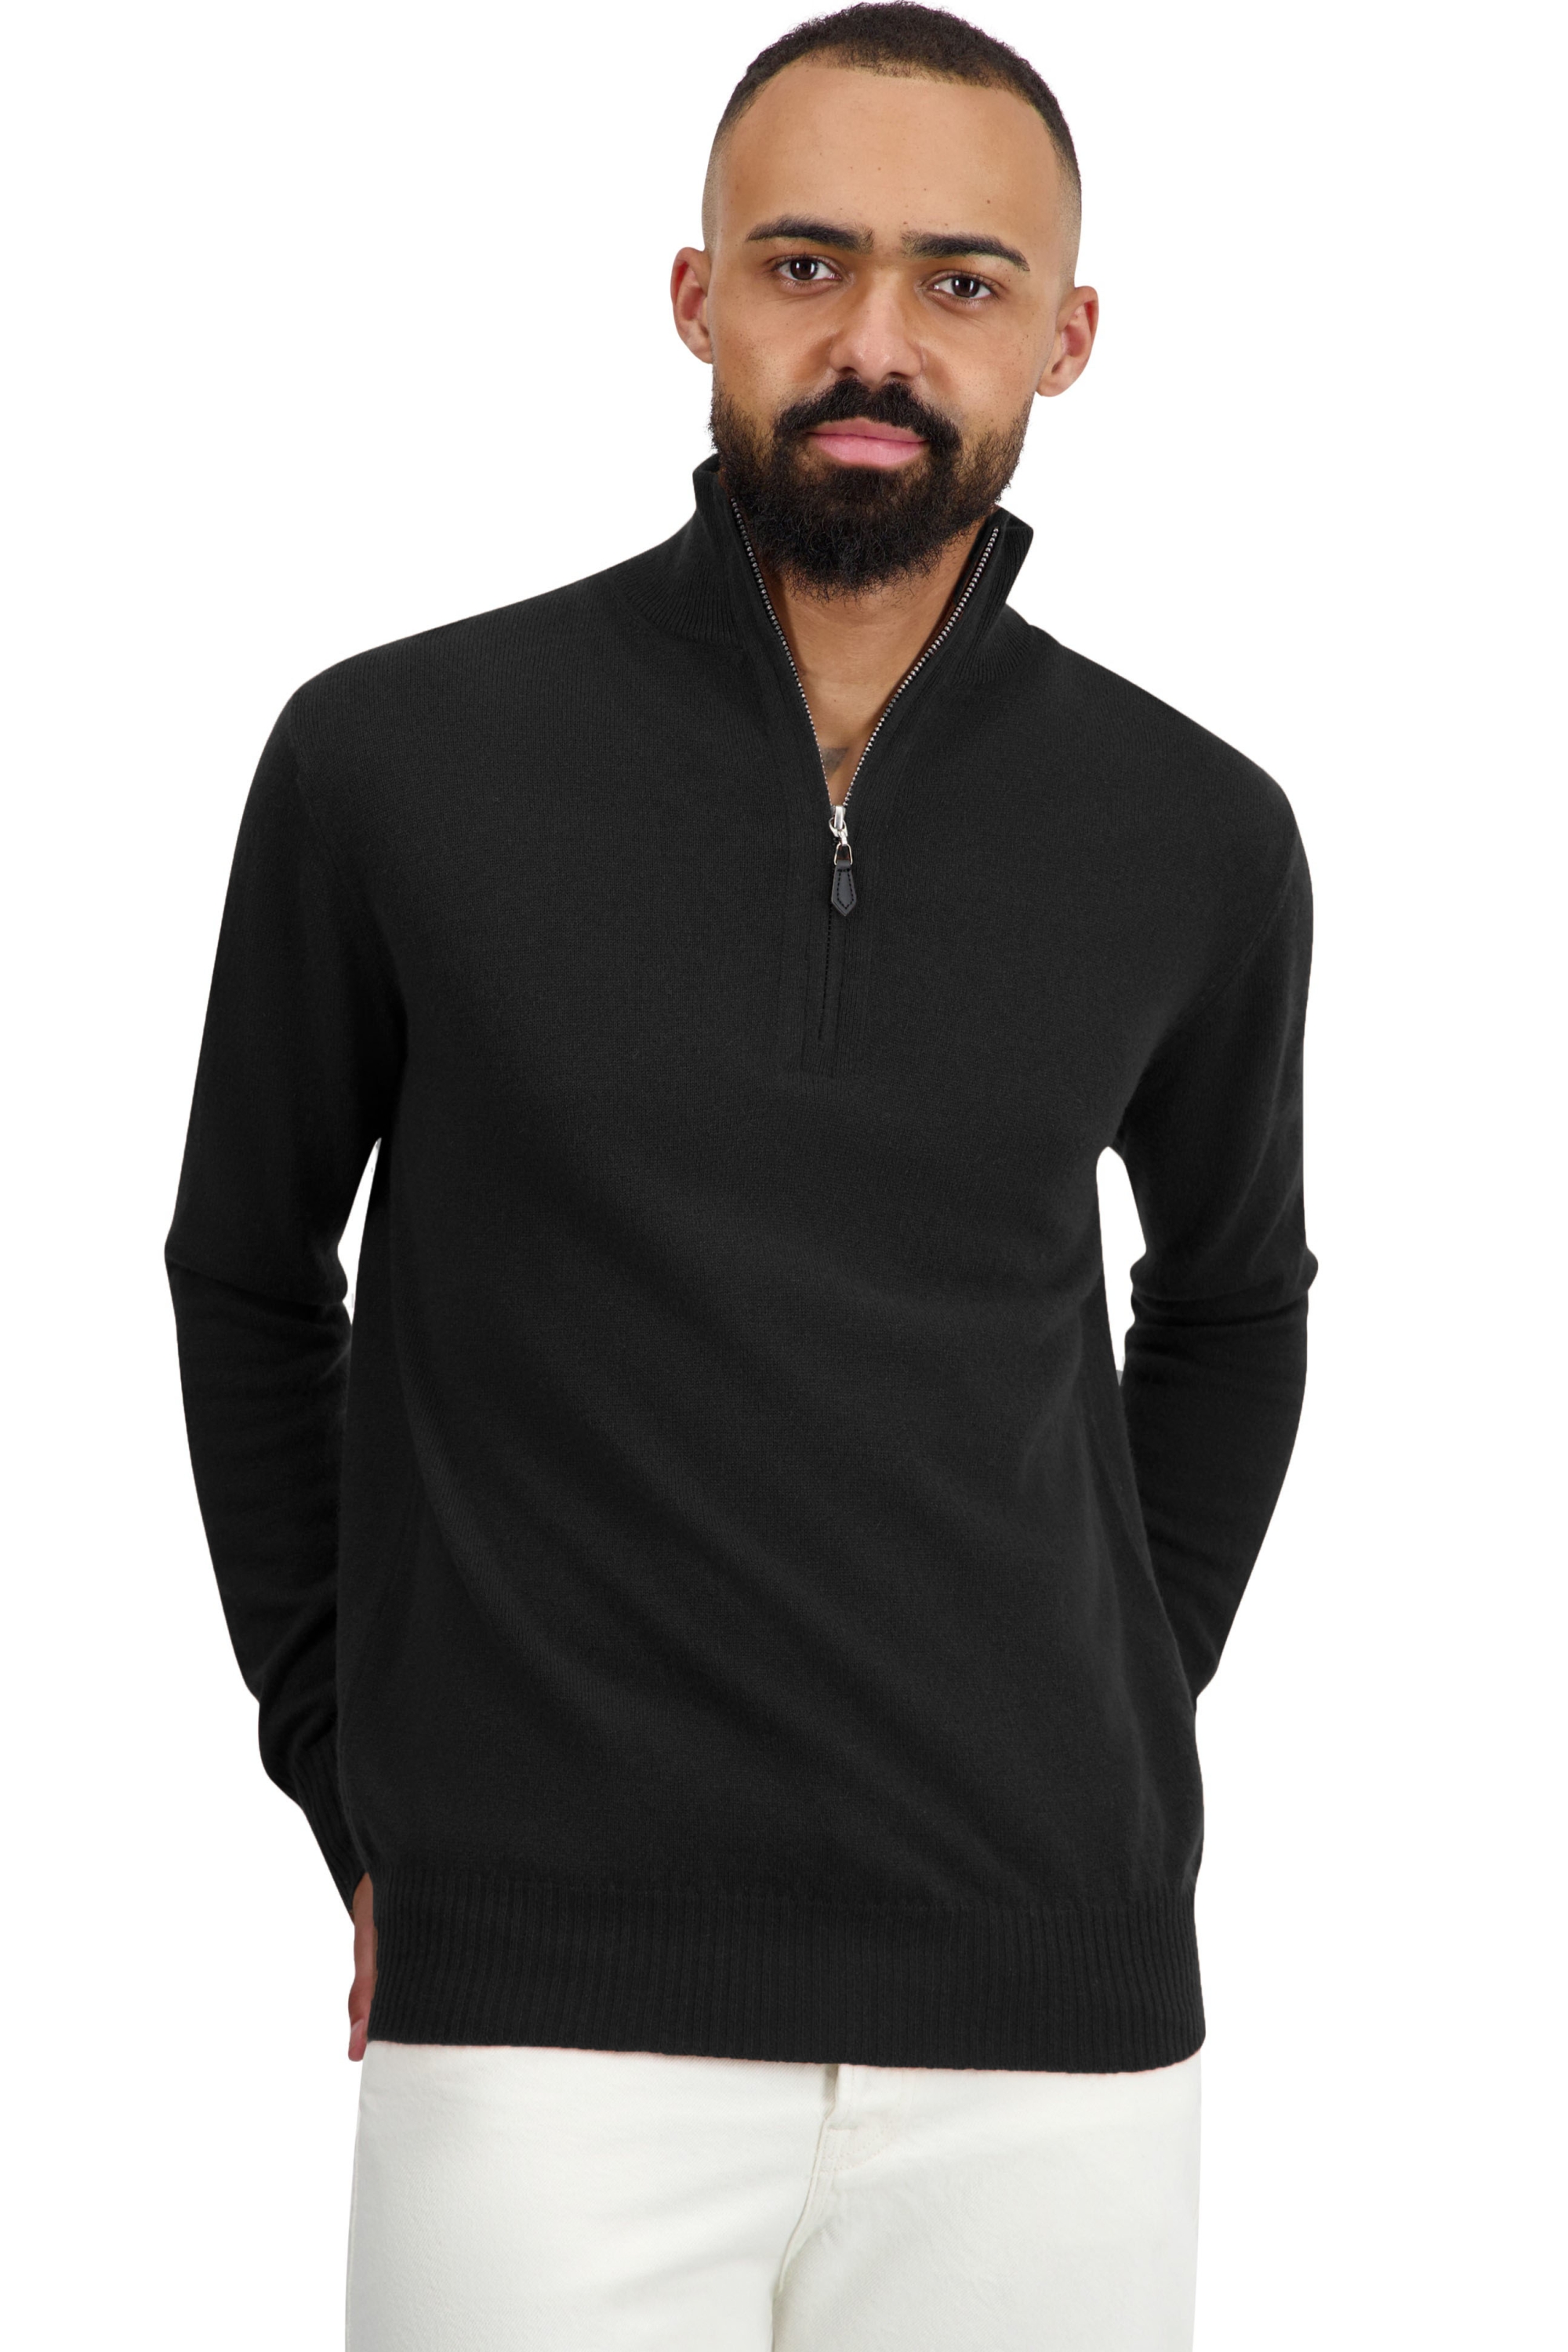 Cashmere men basic sweaters at low prices toulon first black s